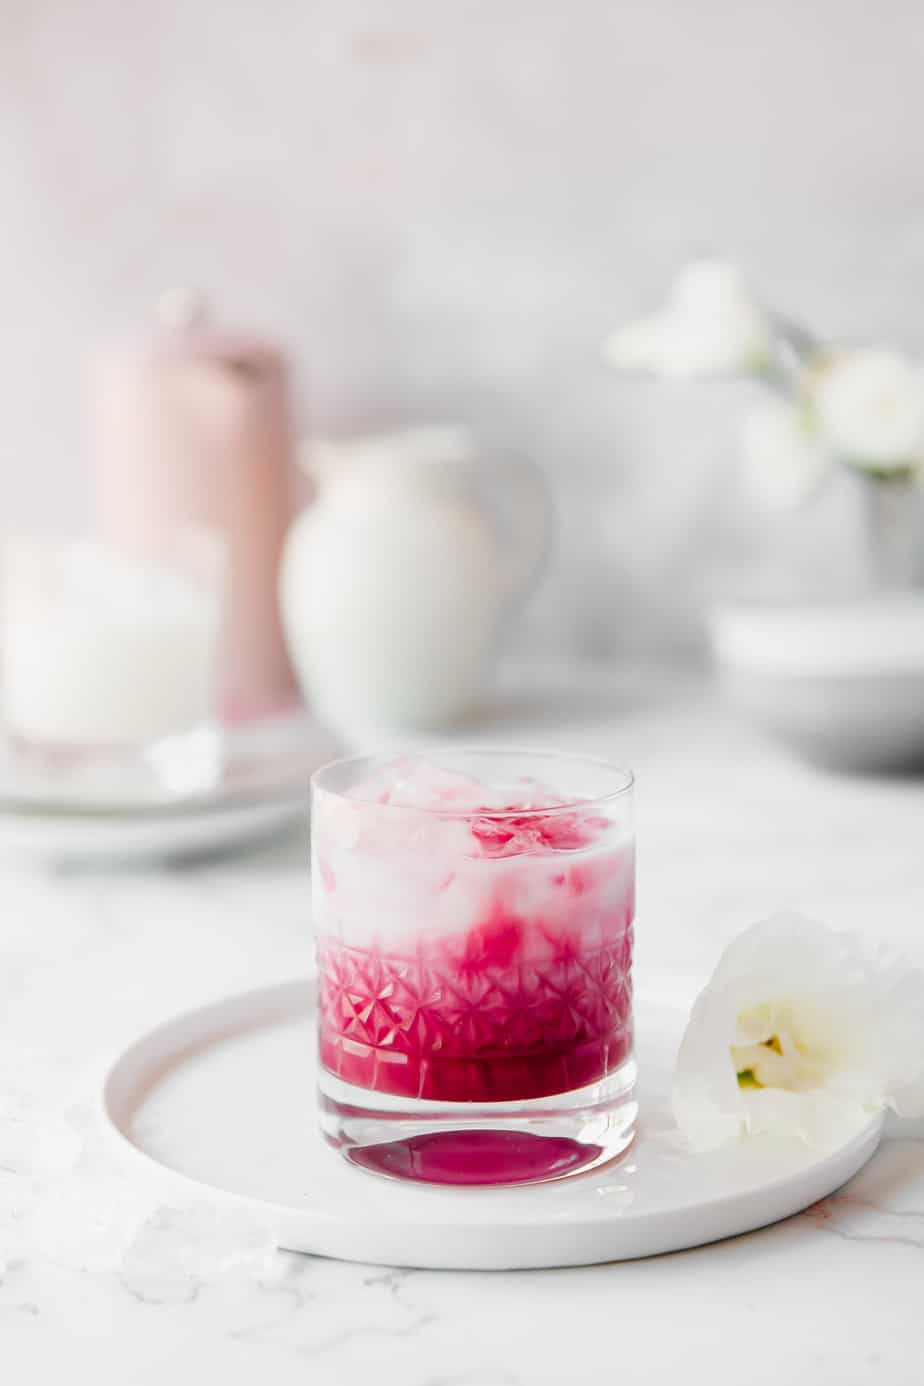 An Homemade Iced Beetroot Latte with Coconut Milk in a glass.